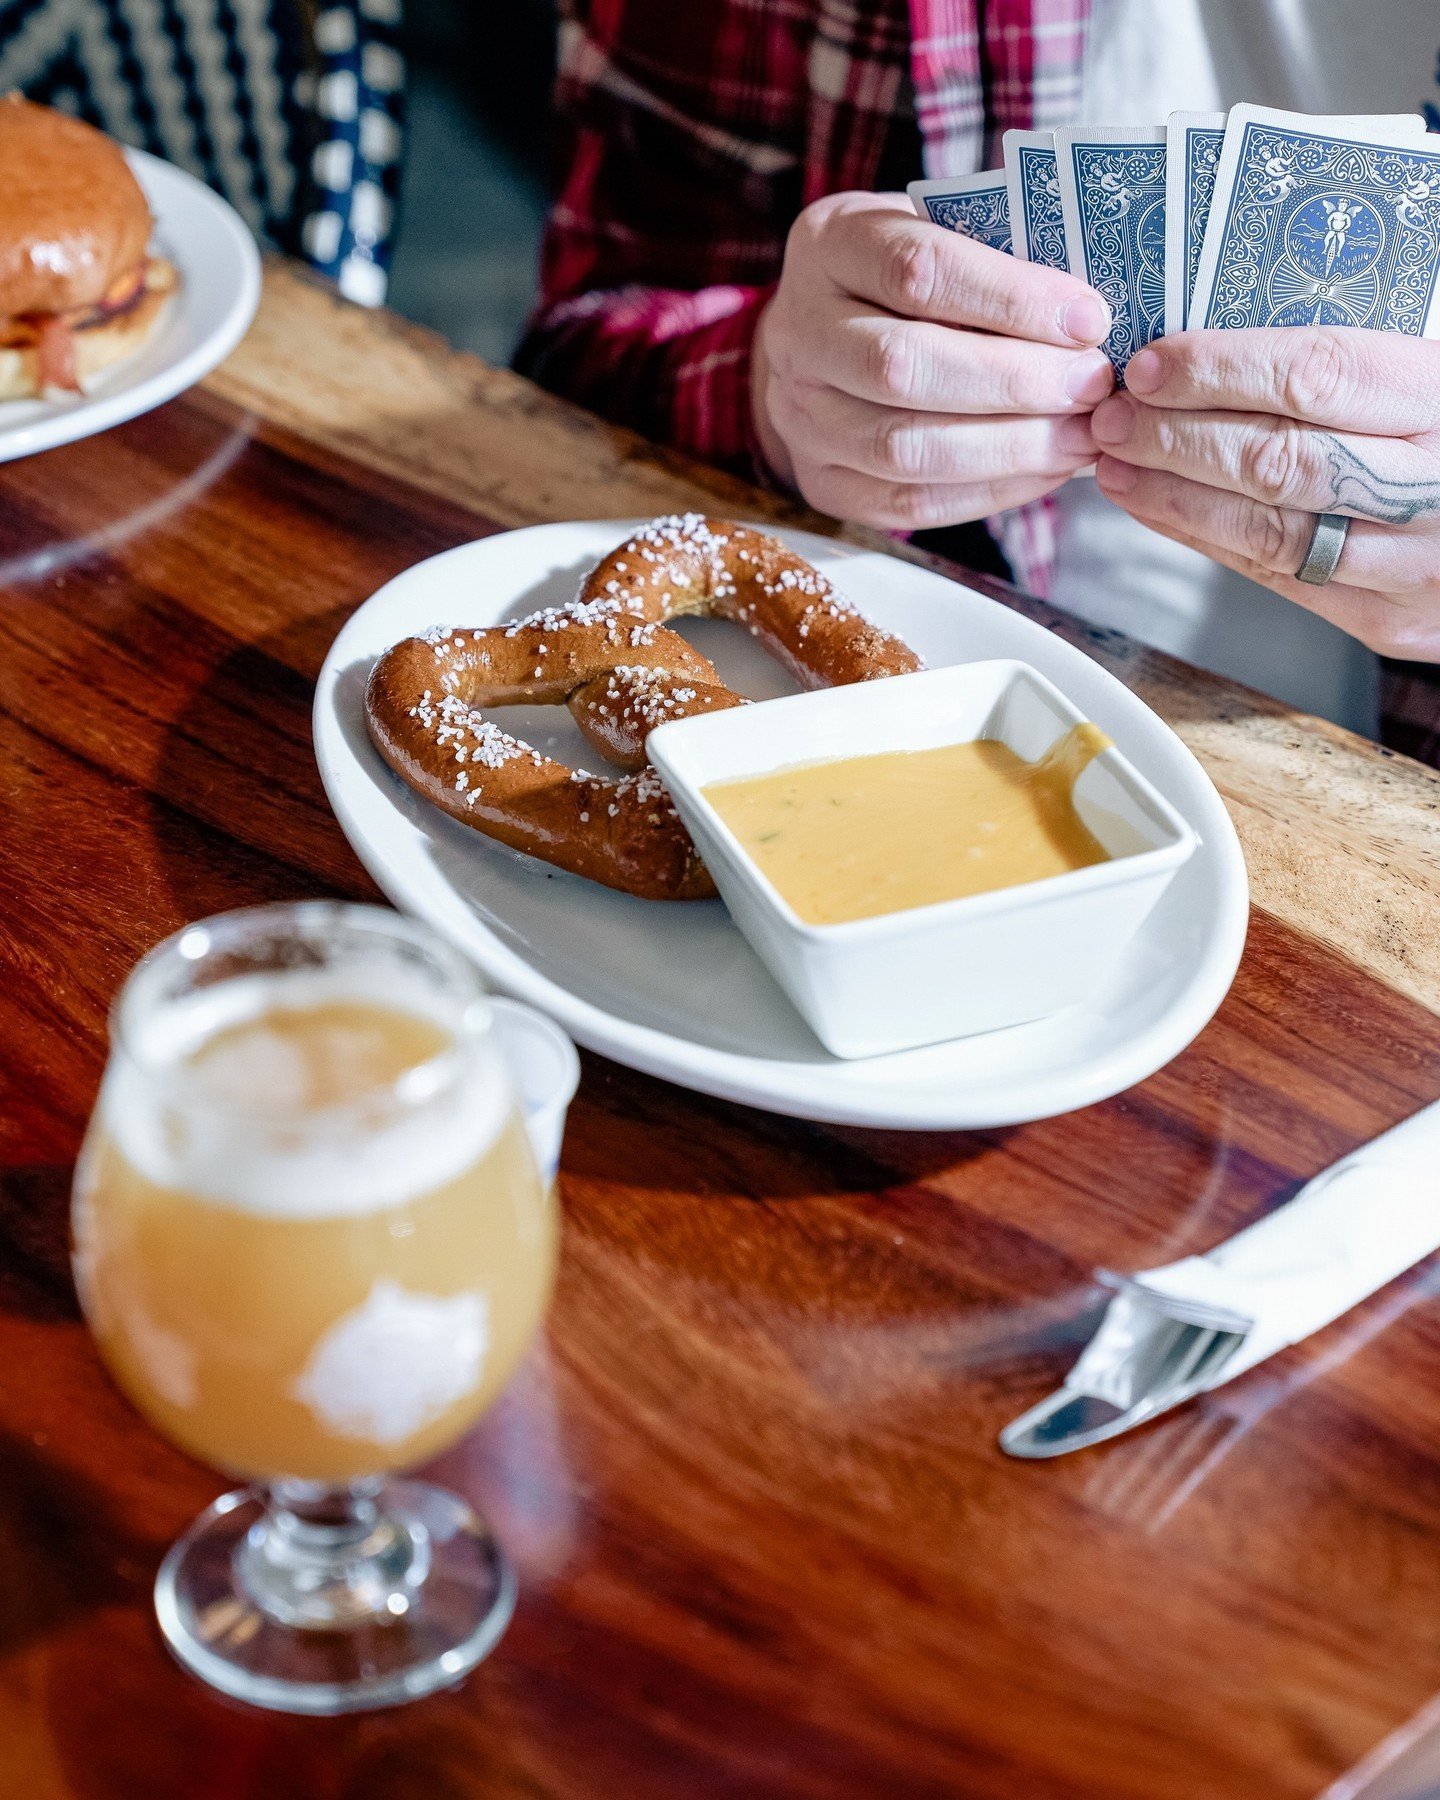 Pretzel and beer = the perfect combo! Grab your squad and have a game day at The Albert! 

#georgia #atlanta #atleats #atlfoodie #thealbert #fresh #bestneighborhoodbar #inmanpark #atlvibes #atlantaeats #falconsgame